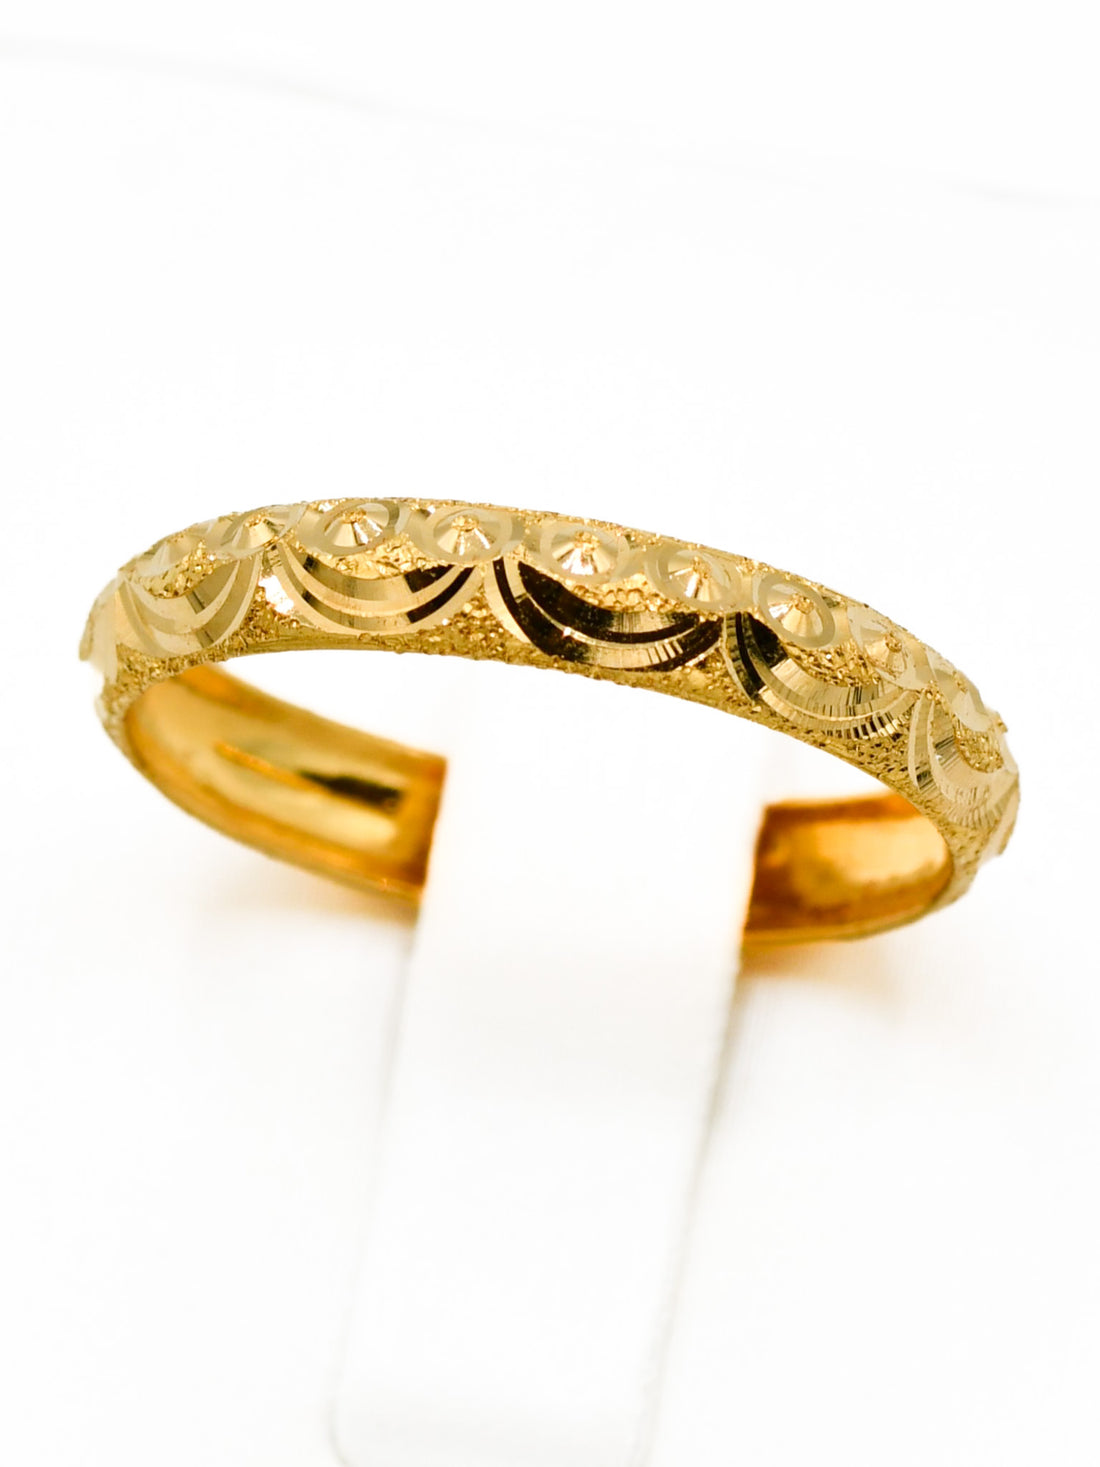 22ct Gold Band Ring